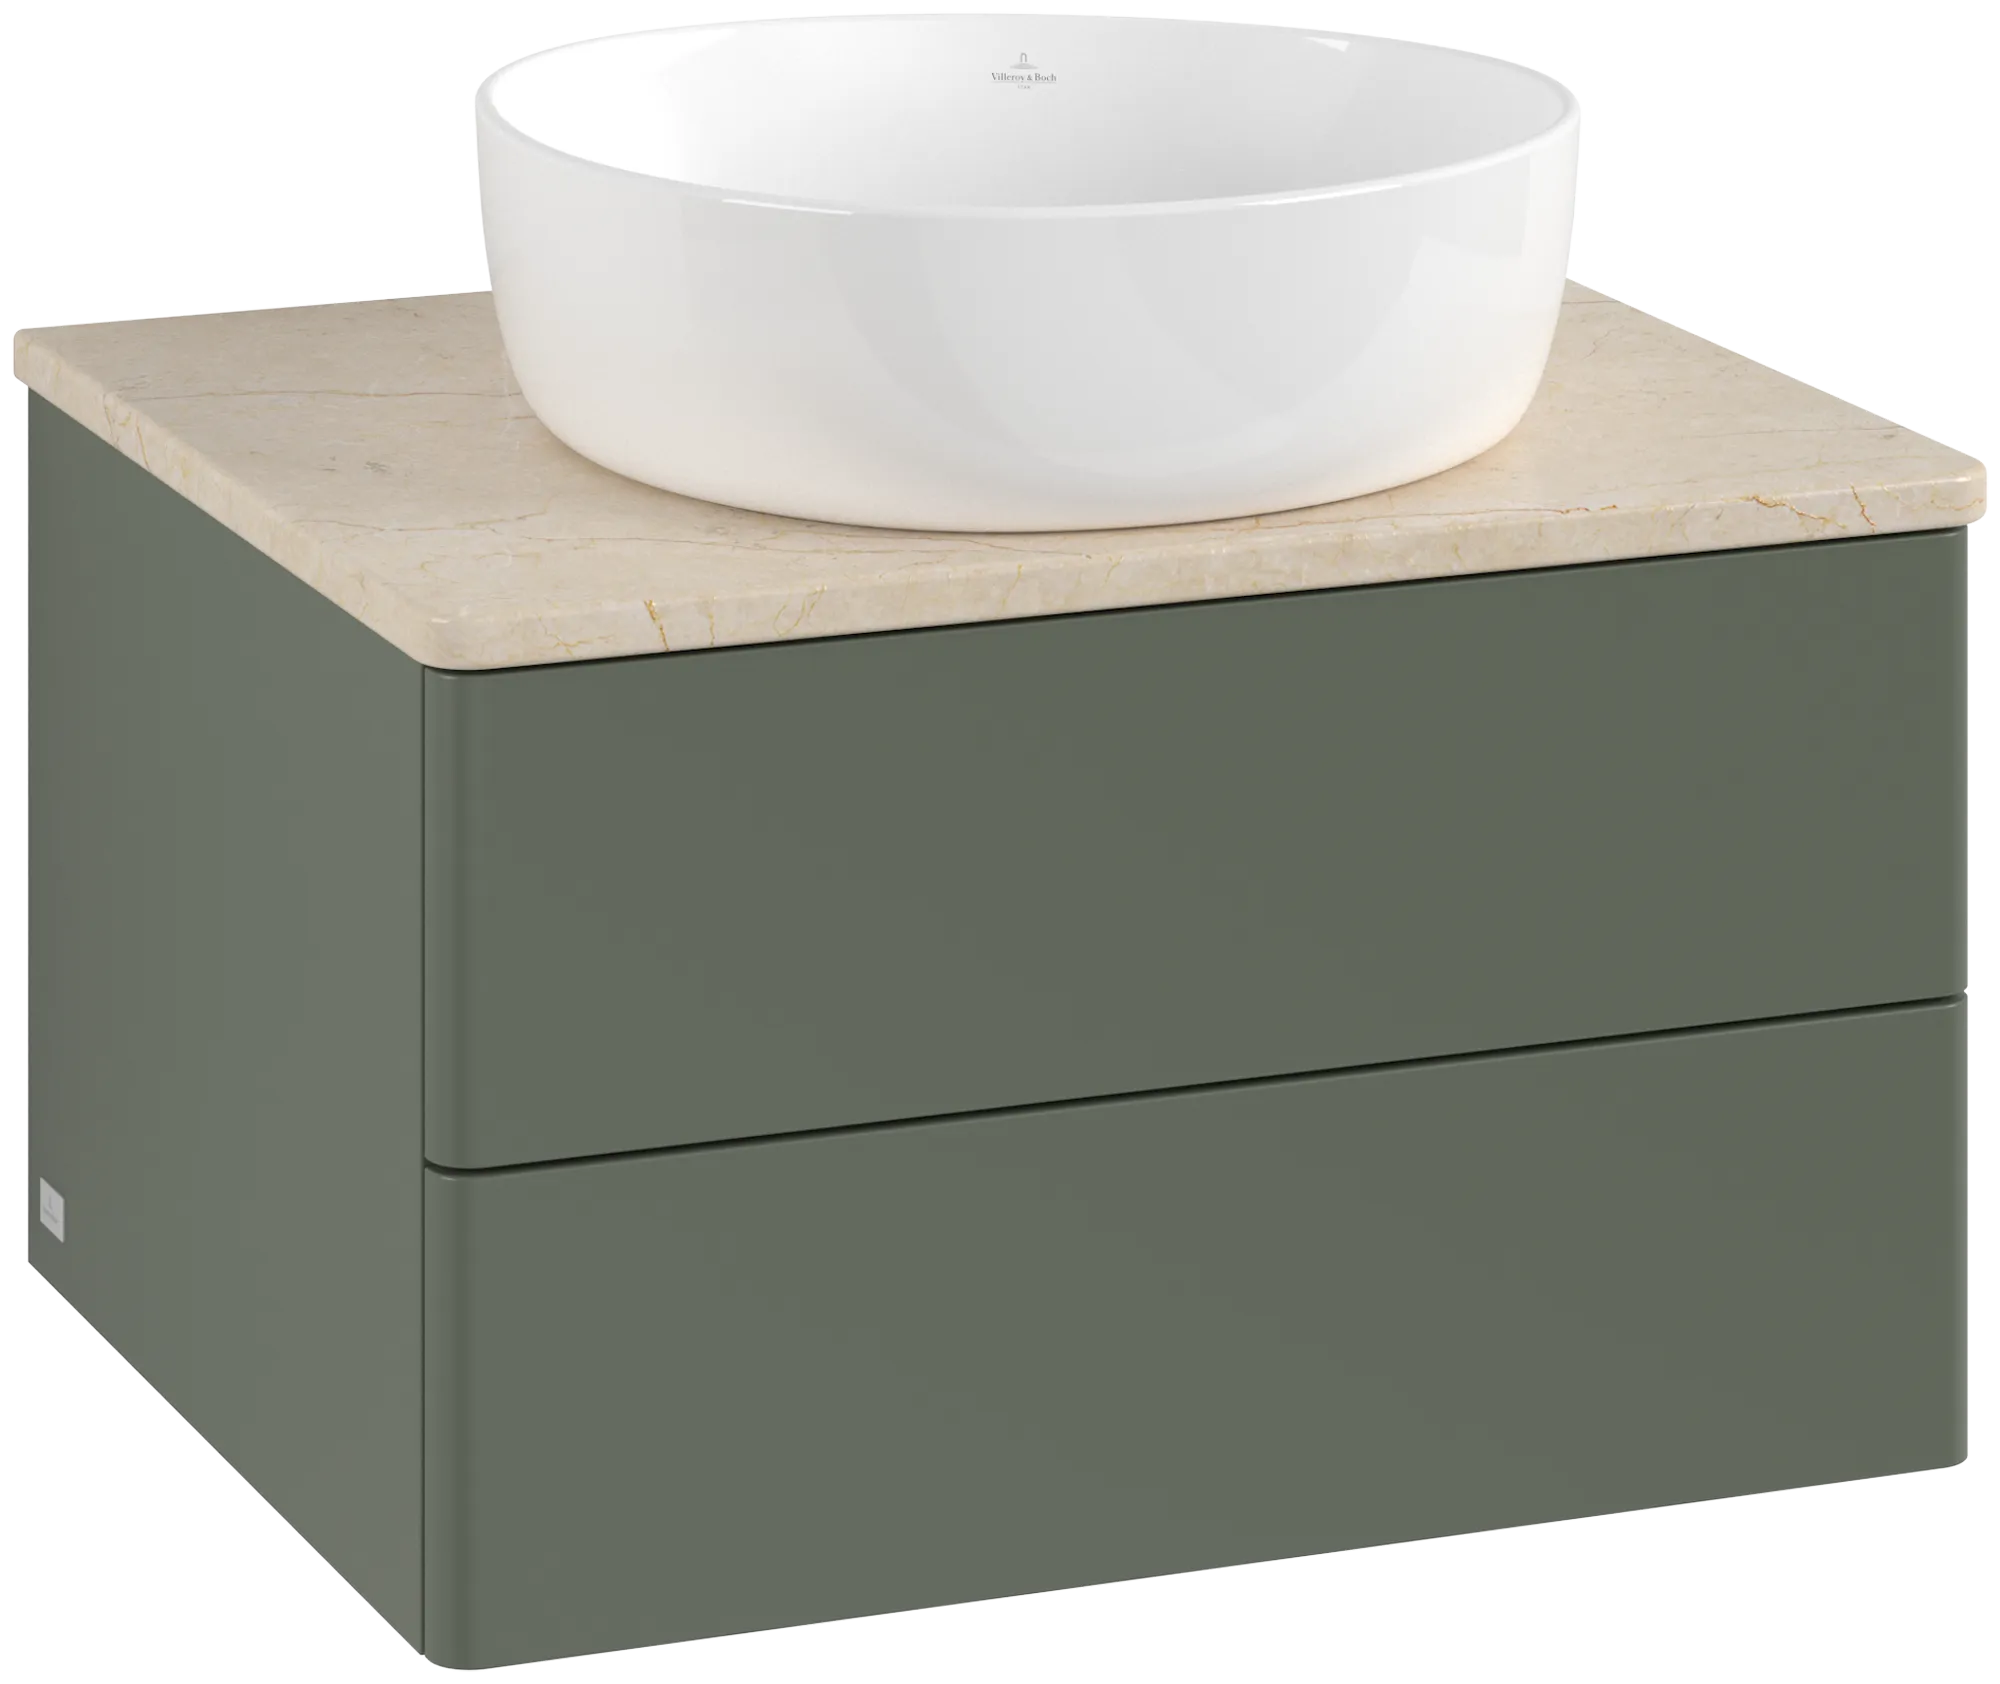 Picture of VILLEROY BOCH Antao Vanity unit, with lighting, 2 pull-out compartments, 600 x 360 x 500 mm, Front without structure, Leaf Green Matt Lacquer / Botticino #L18013HL